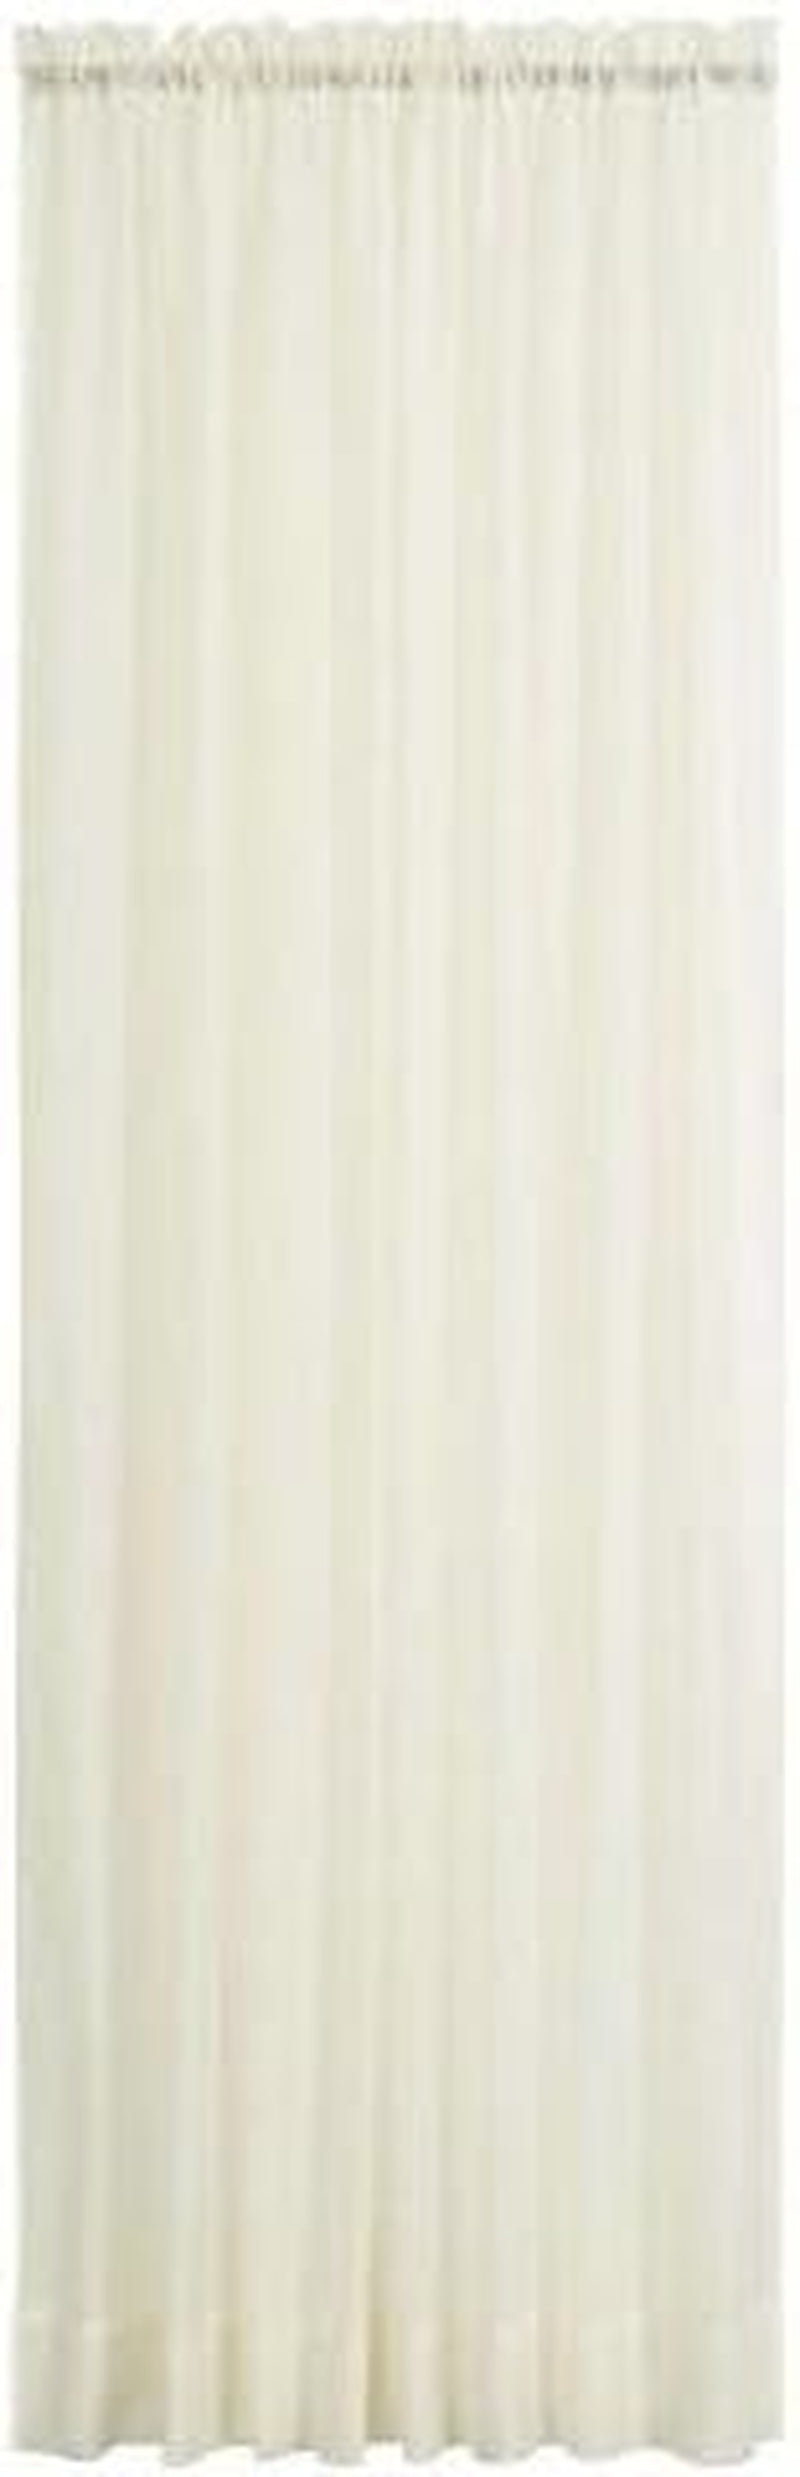 Stylemaster Splendor Pinch Pleated Drapes Pair, 2 of 60" by 84", White  Stylemaster Home Products Beige 56 In X 84 In | Rod Pocket Panel 